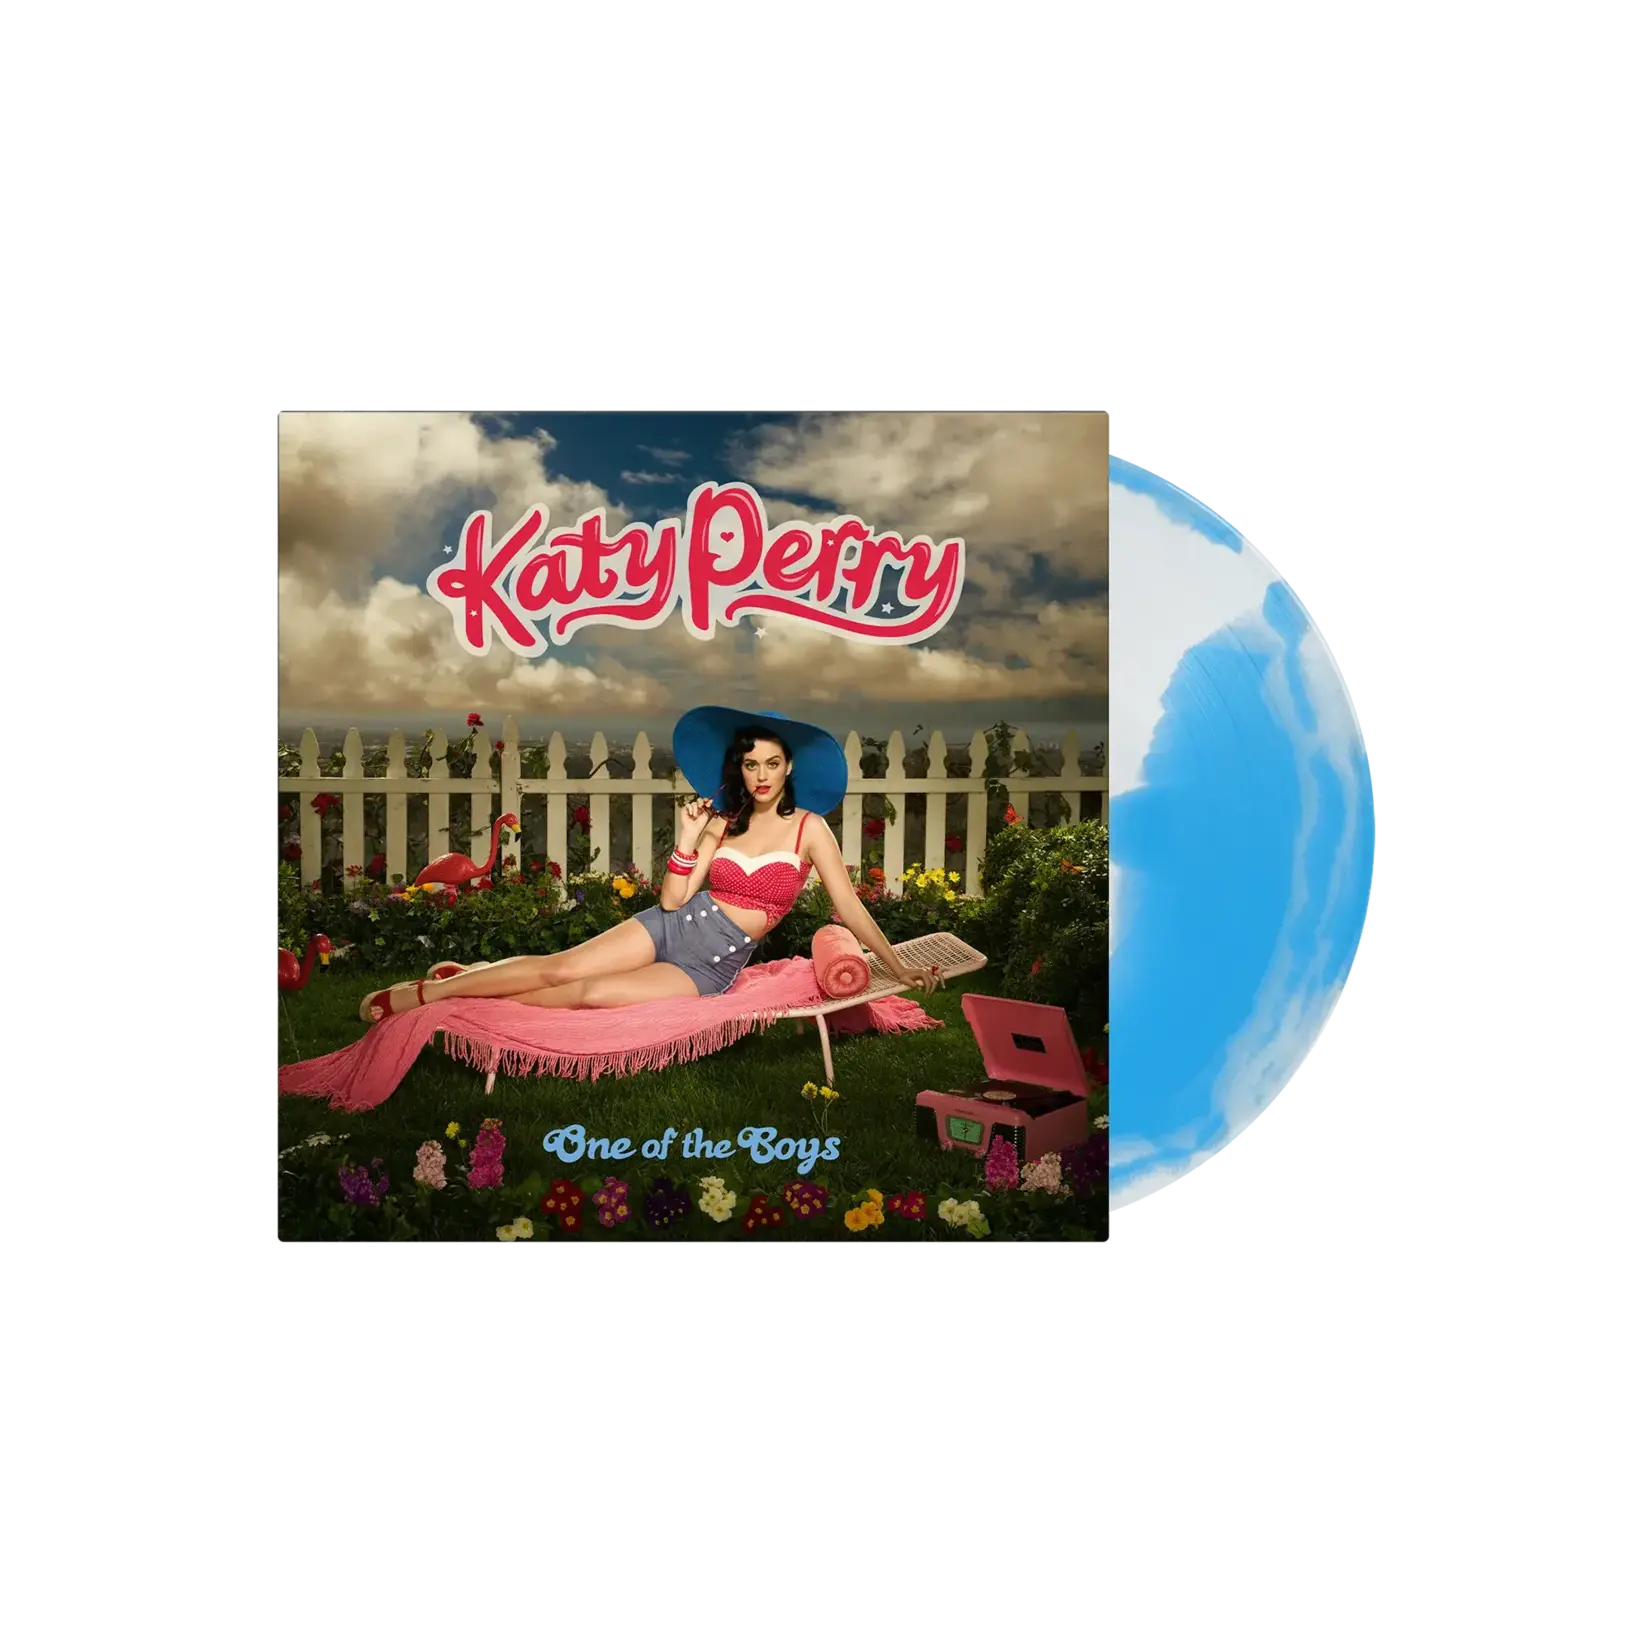 [New] Perry, Katy: One Of The Boys (LP+7", 15th Anniversary, blue vinyl w/ white swirl) [CAPITOL]